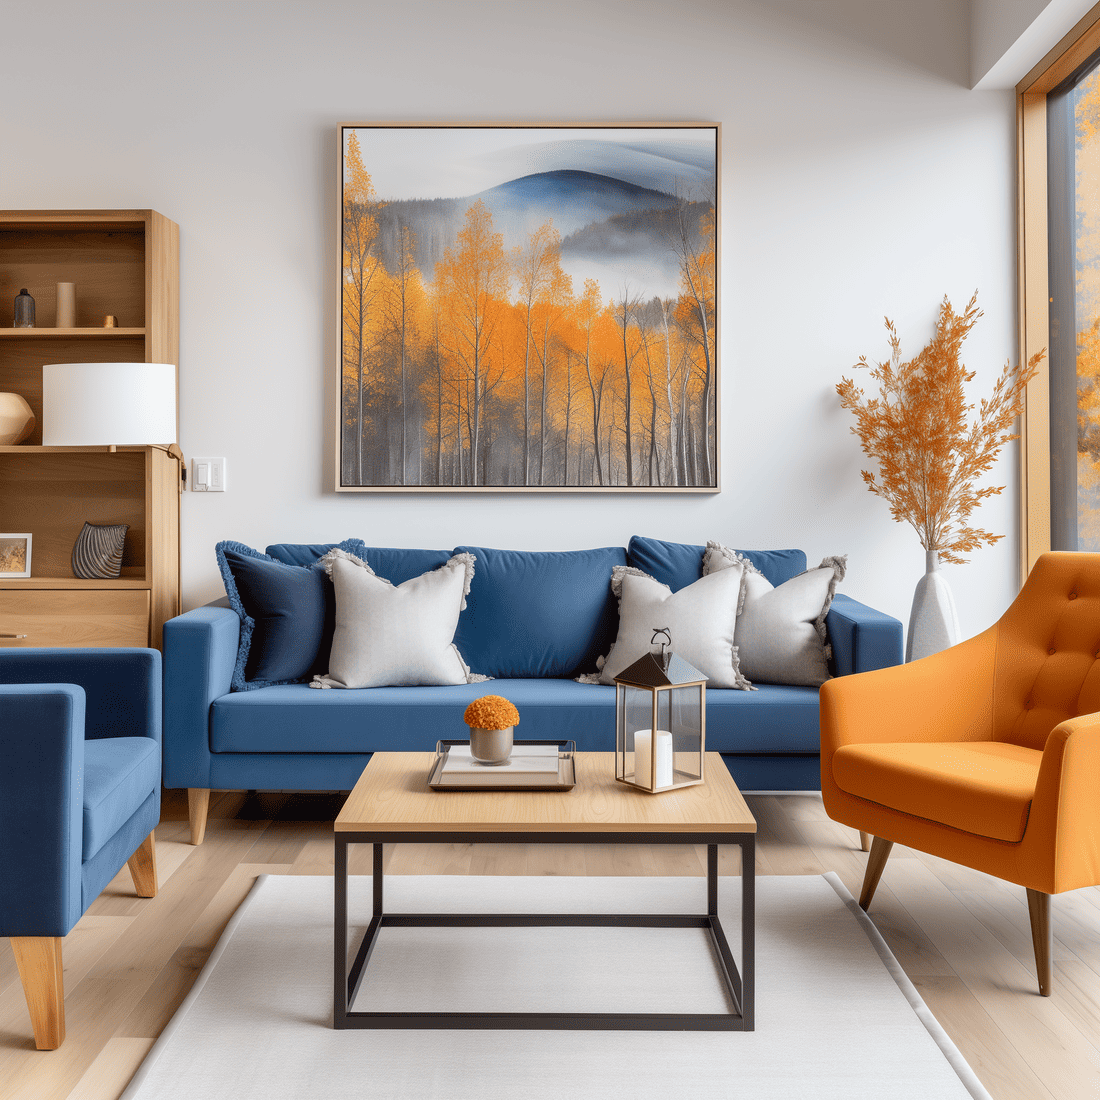 Vibrant living room with blue sofa and autumn accents.